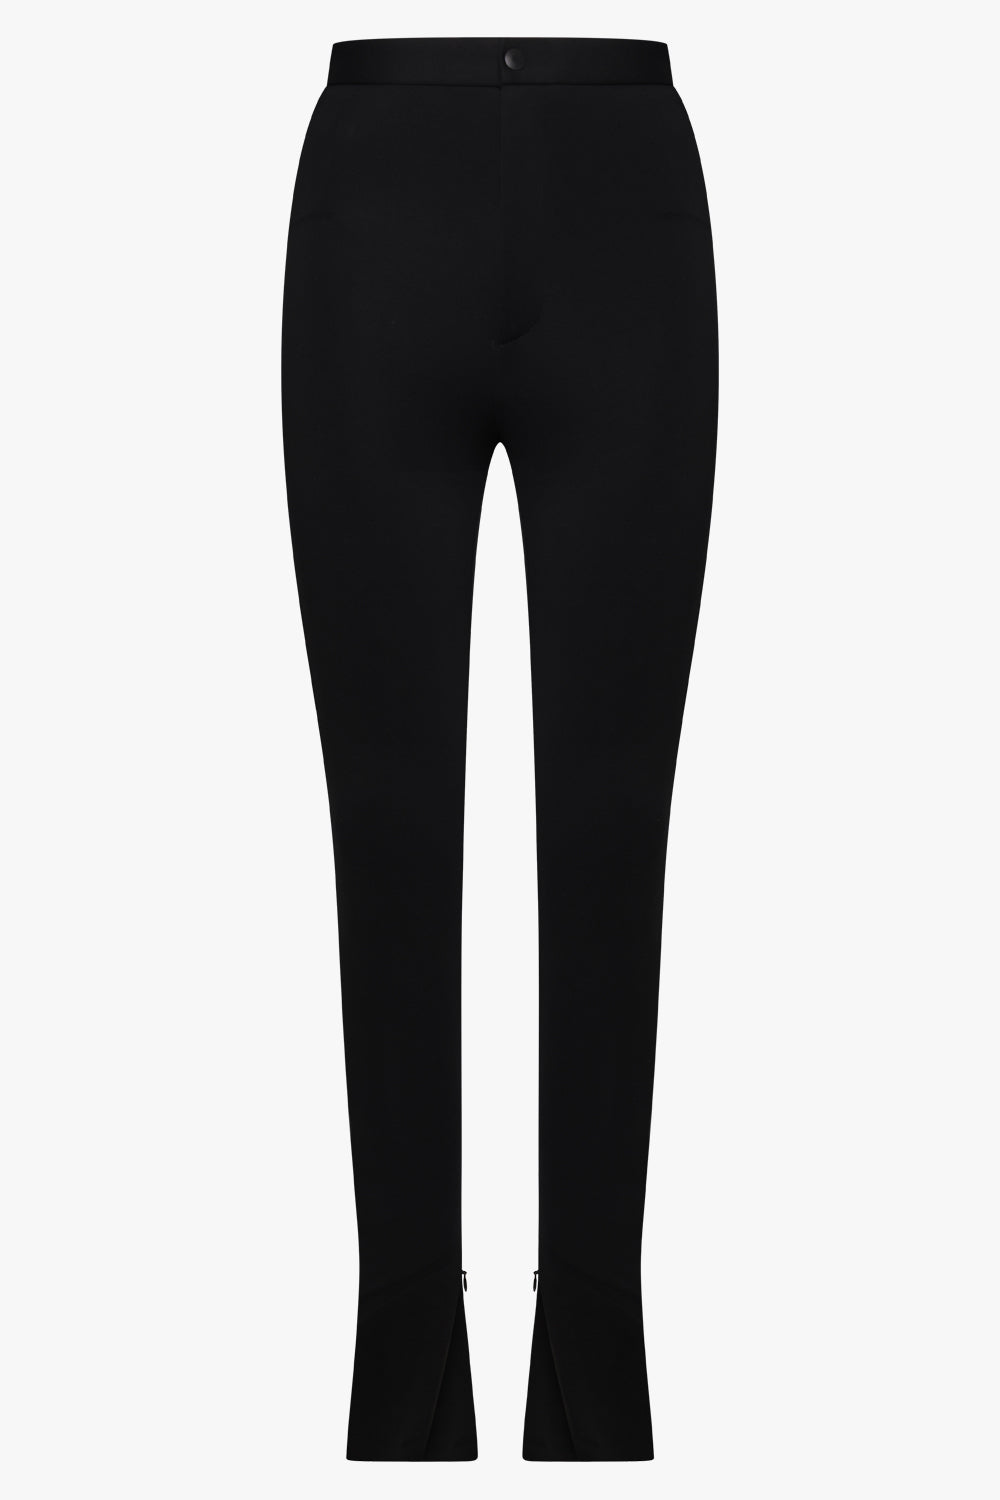 Update more than 116 black legging pants with zippers best